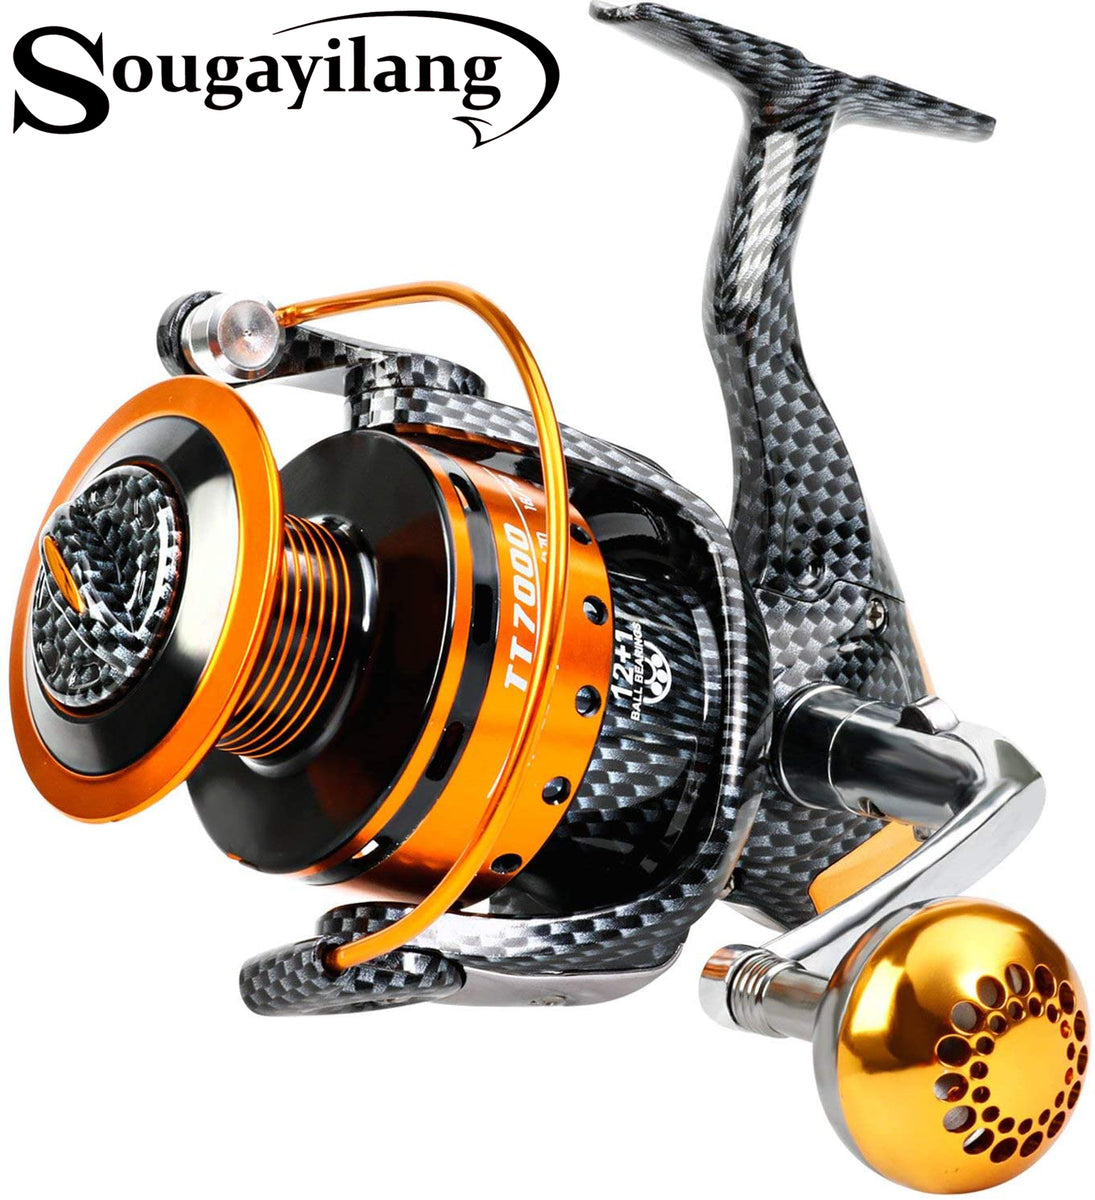 Burning Shark Fishing Reels- 12+1 BB, Light and Smooth Spinning Reels,  Powerful Carbon Fiber Drag, Saltwater and Freshwater Fishing